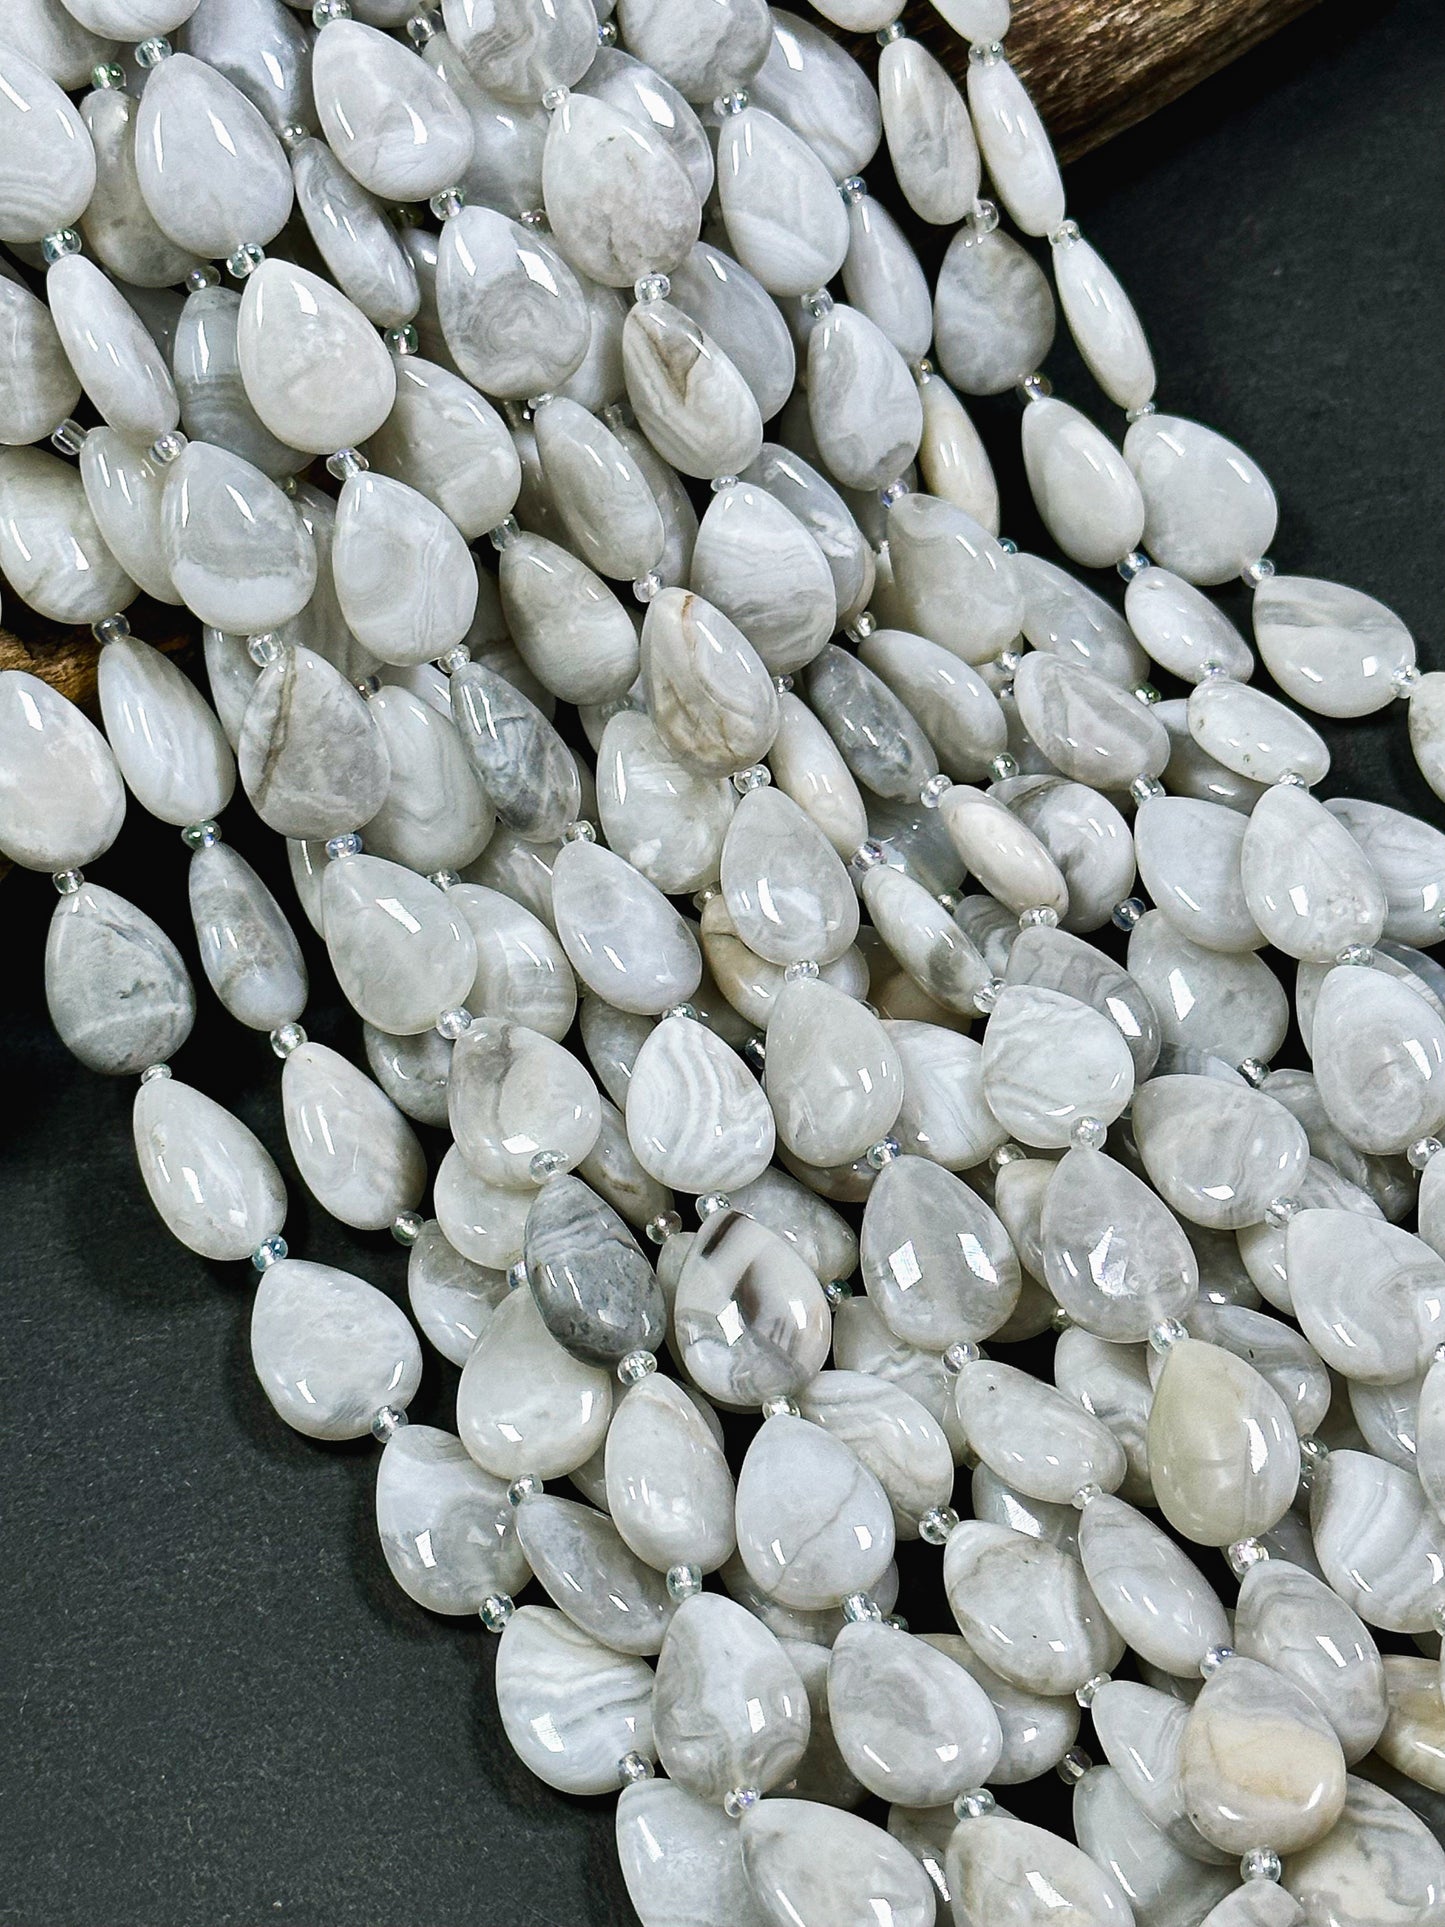 Natural White Lace Agate Gemstone Bead 18x13mm Teardrop Shape, Gorgeous White Gray Color Agate Gemstone Bead Great Quality Full Strand 15.5"